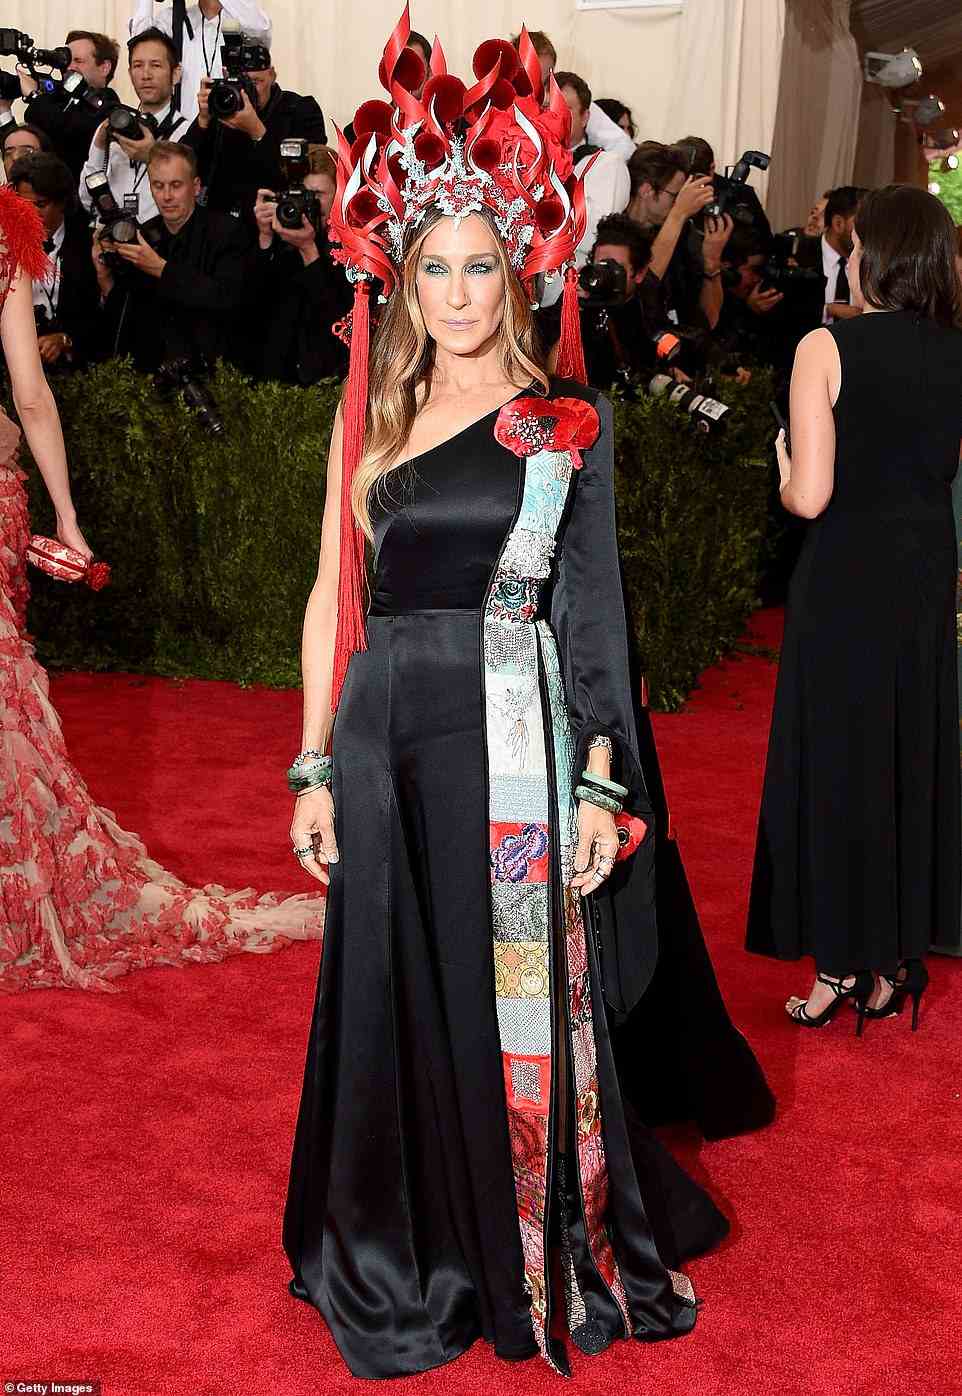 Sarah Jessica Parker has also been one to dive into the year's theme, which she did in an H&M dress and Philip Treacy headpiece in 2015